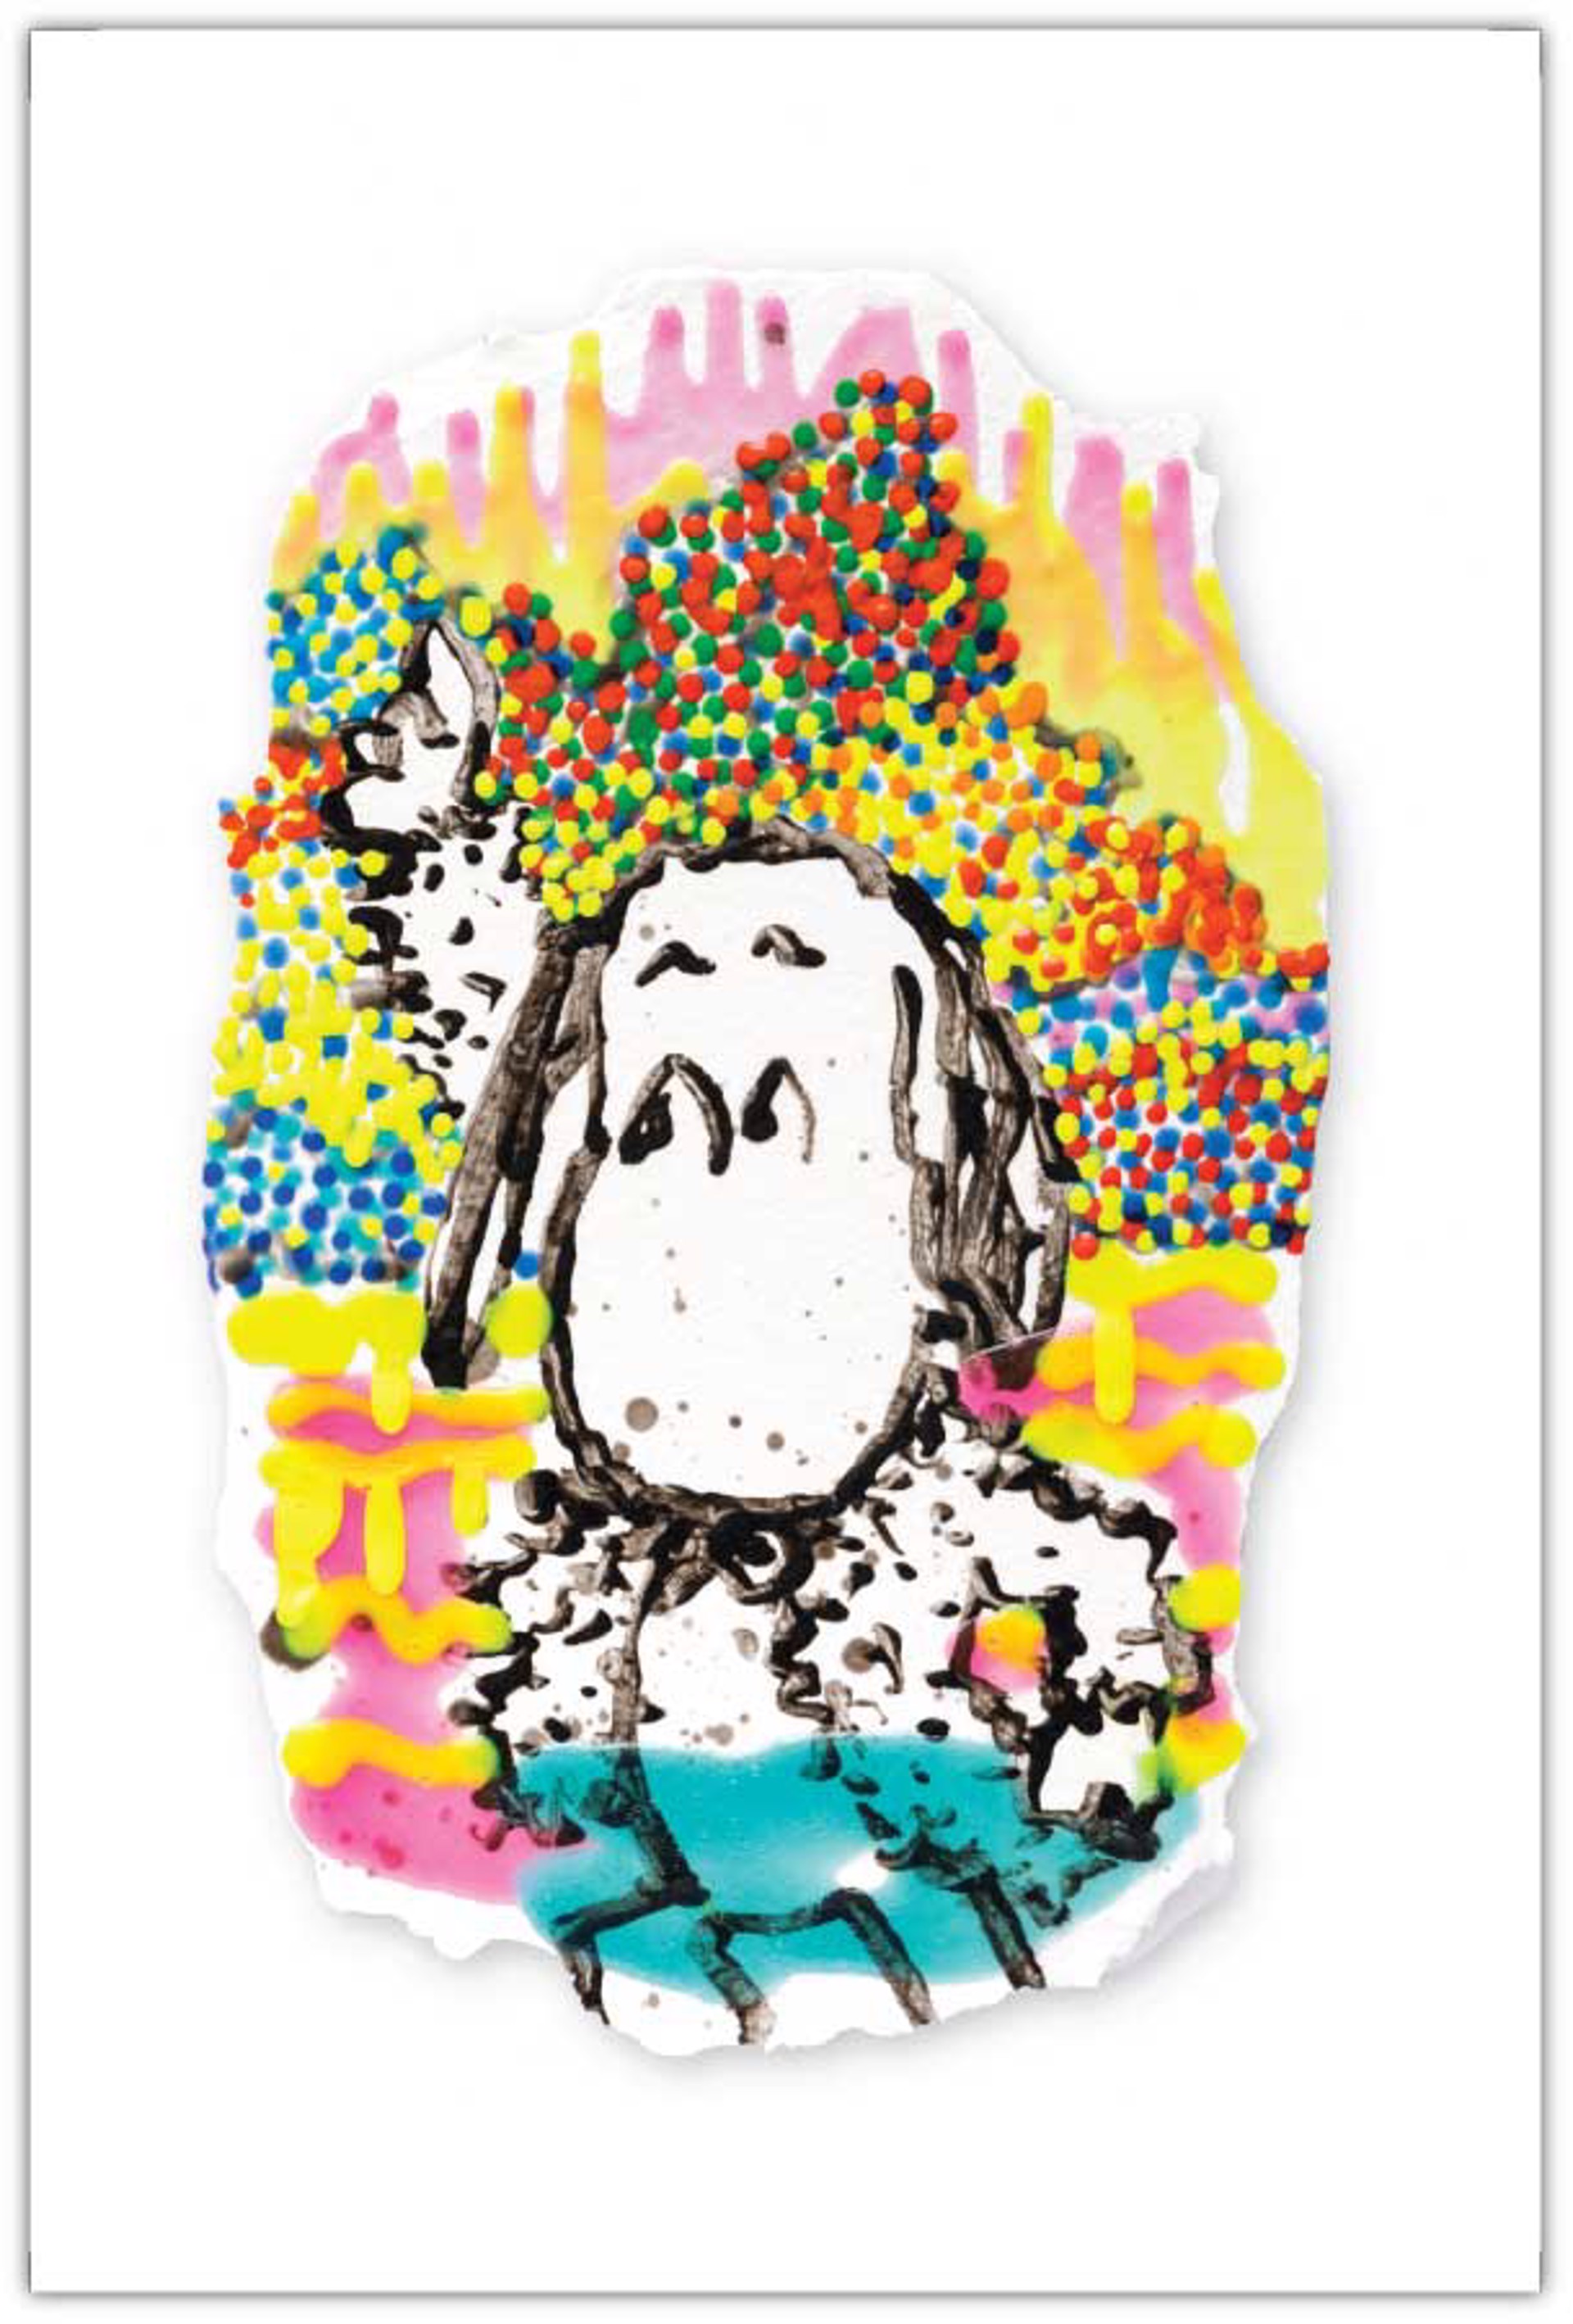 Water Lilly III by Tom Everhart